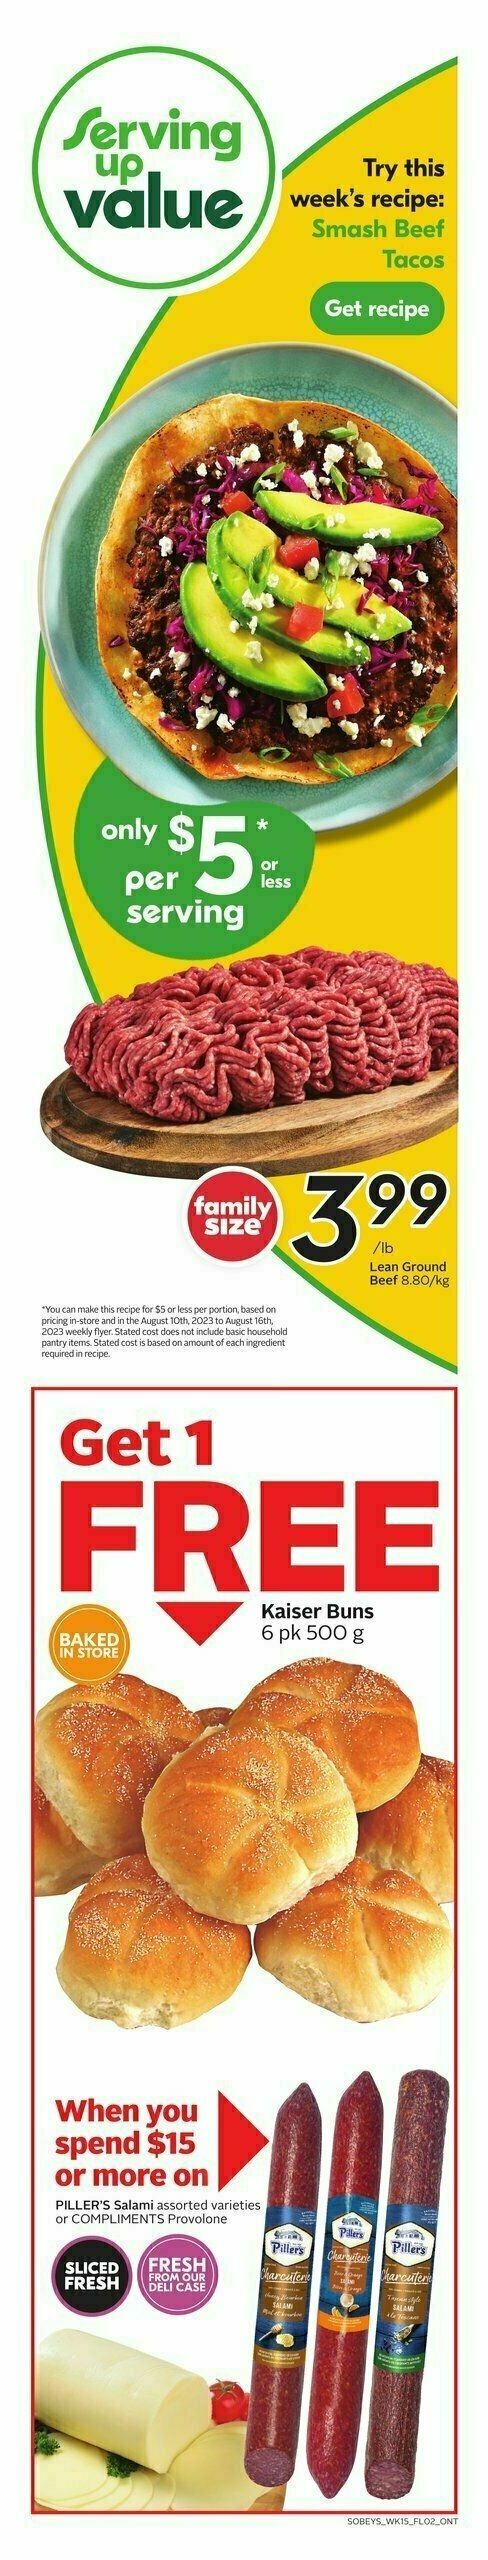 Sobeys Flyer from August 10